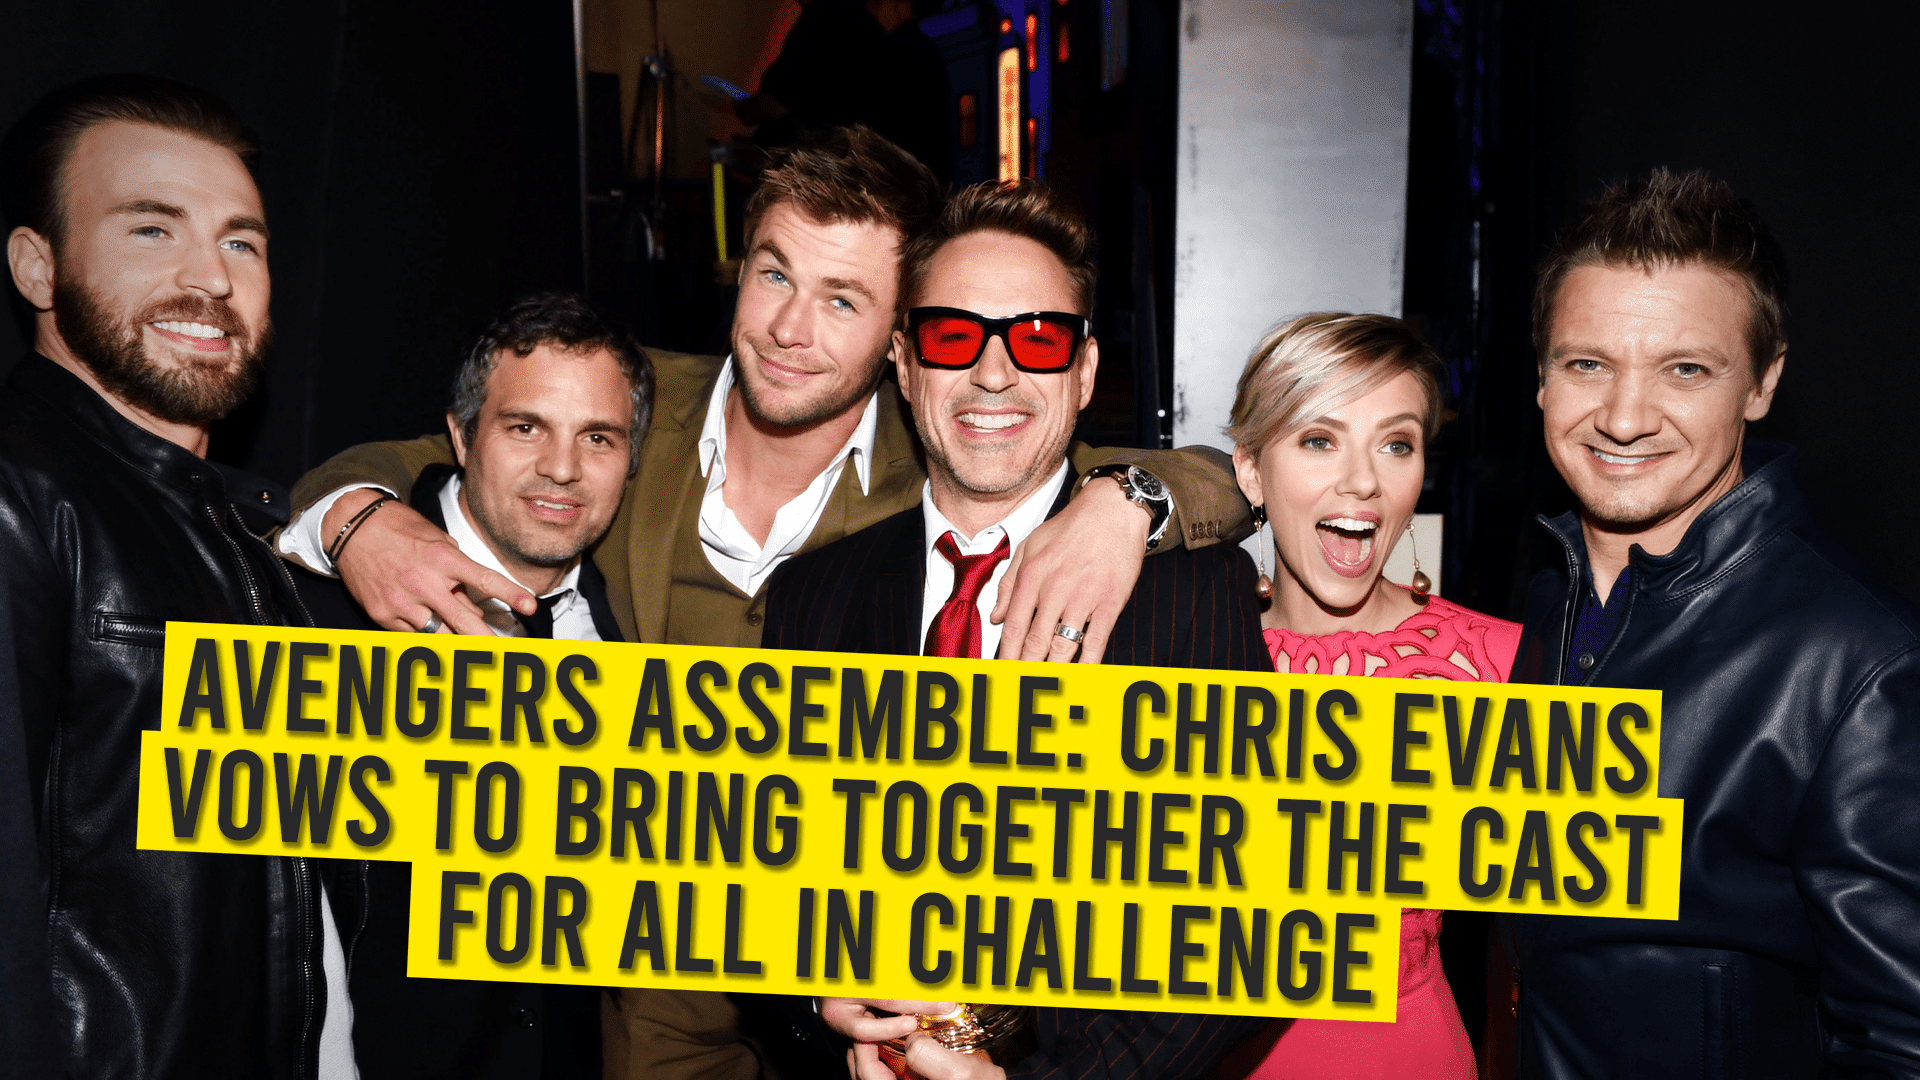 Avengers Assemble: Chris Evans Vows to Bring Together The Cast For All In Challenge